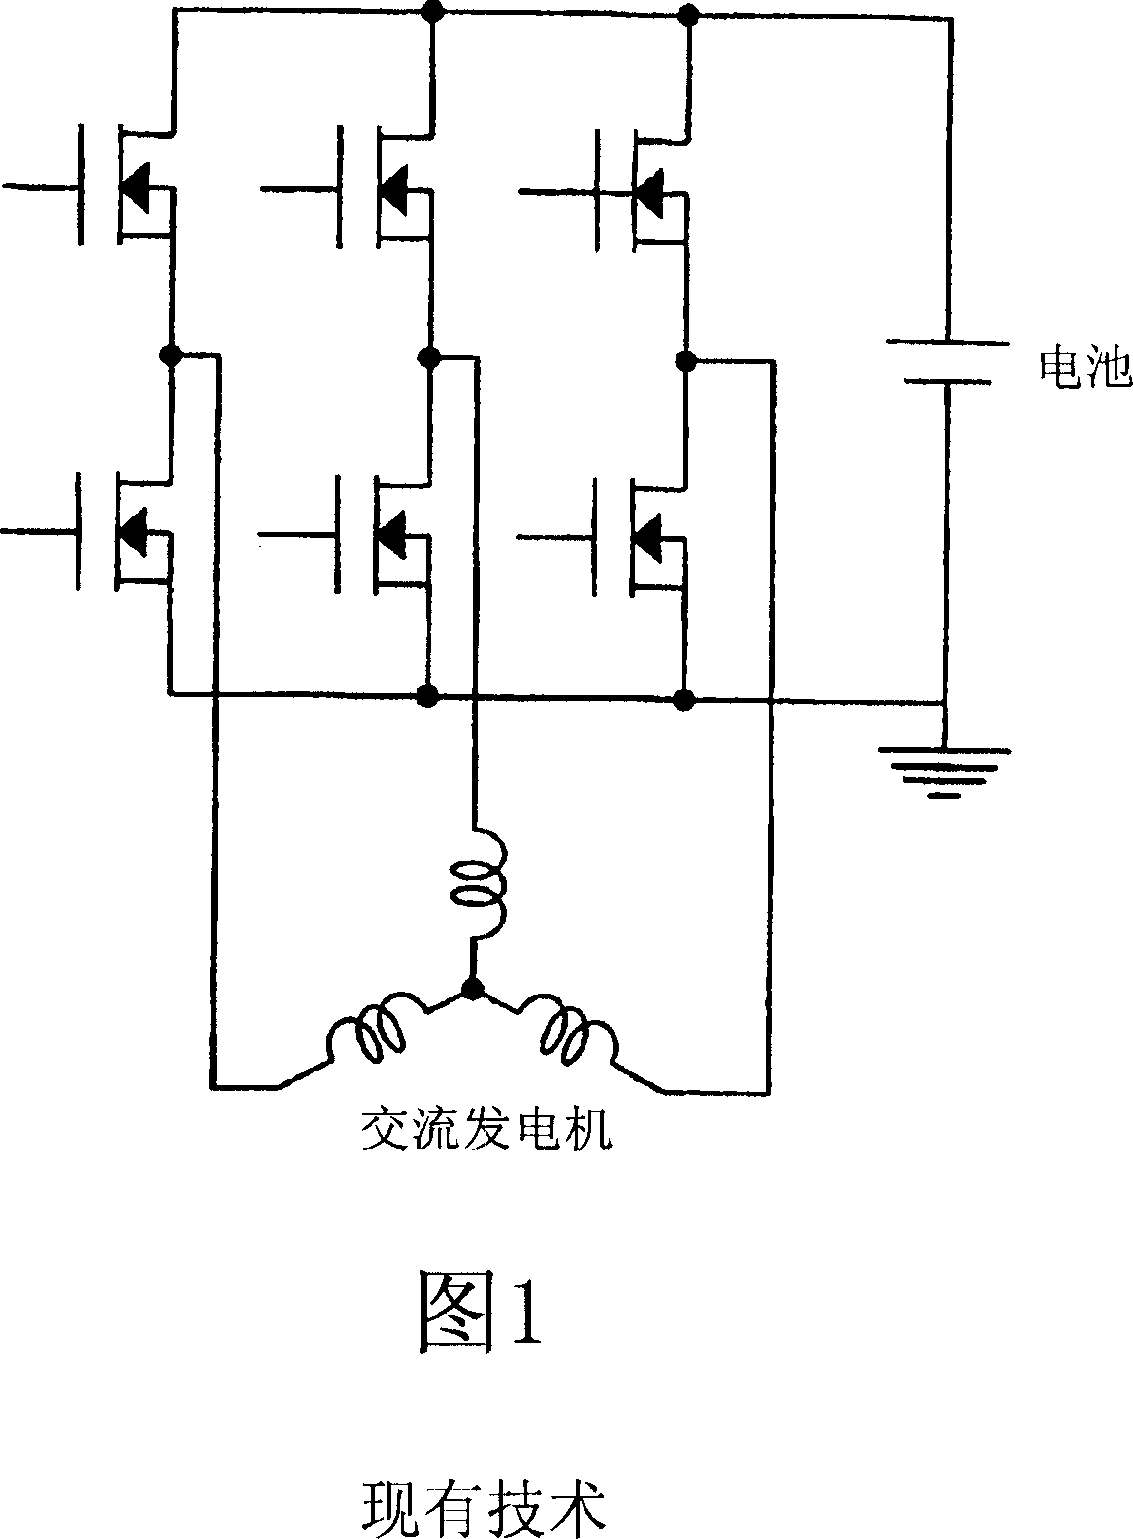 Method and apparatus for driving a power MOS device as a synchronous rectifier